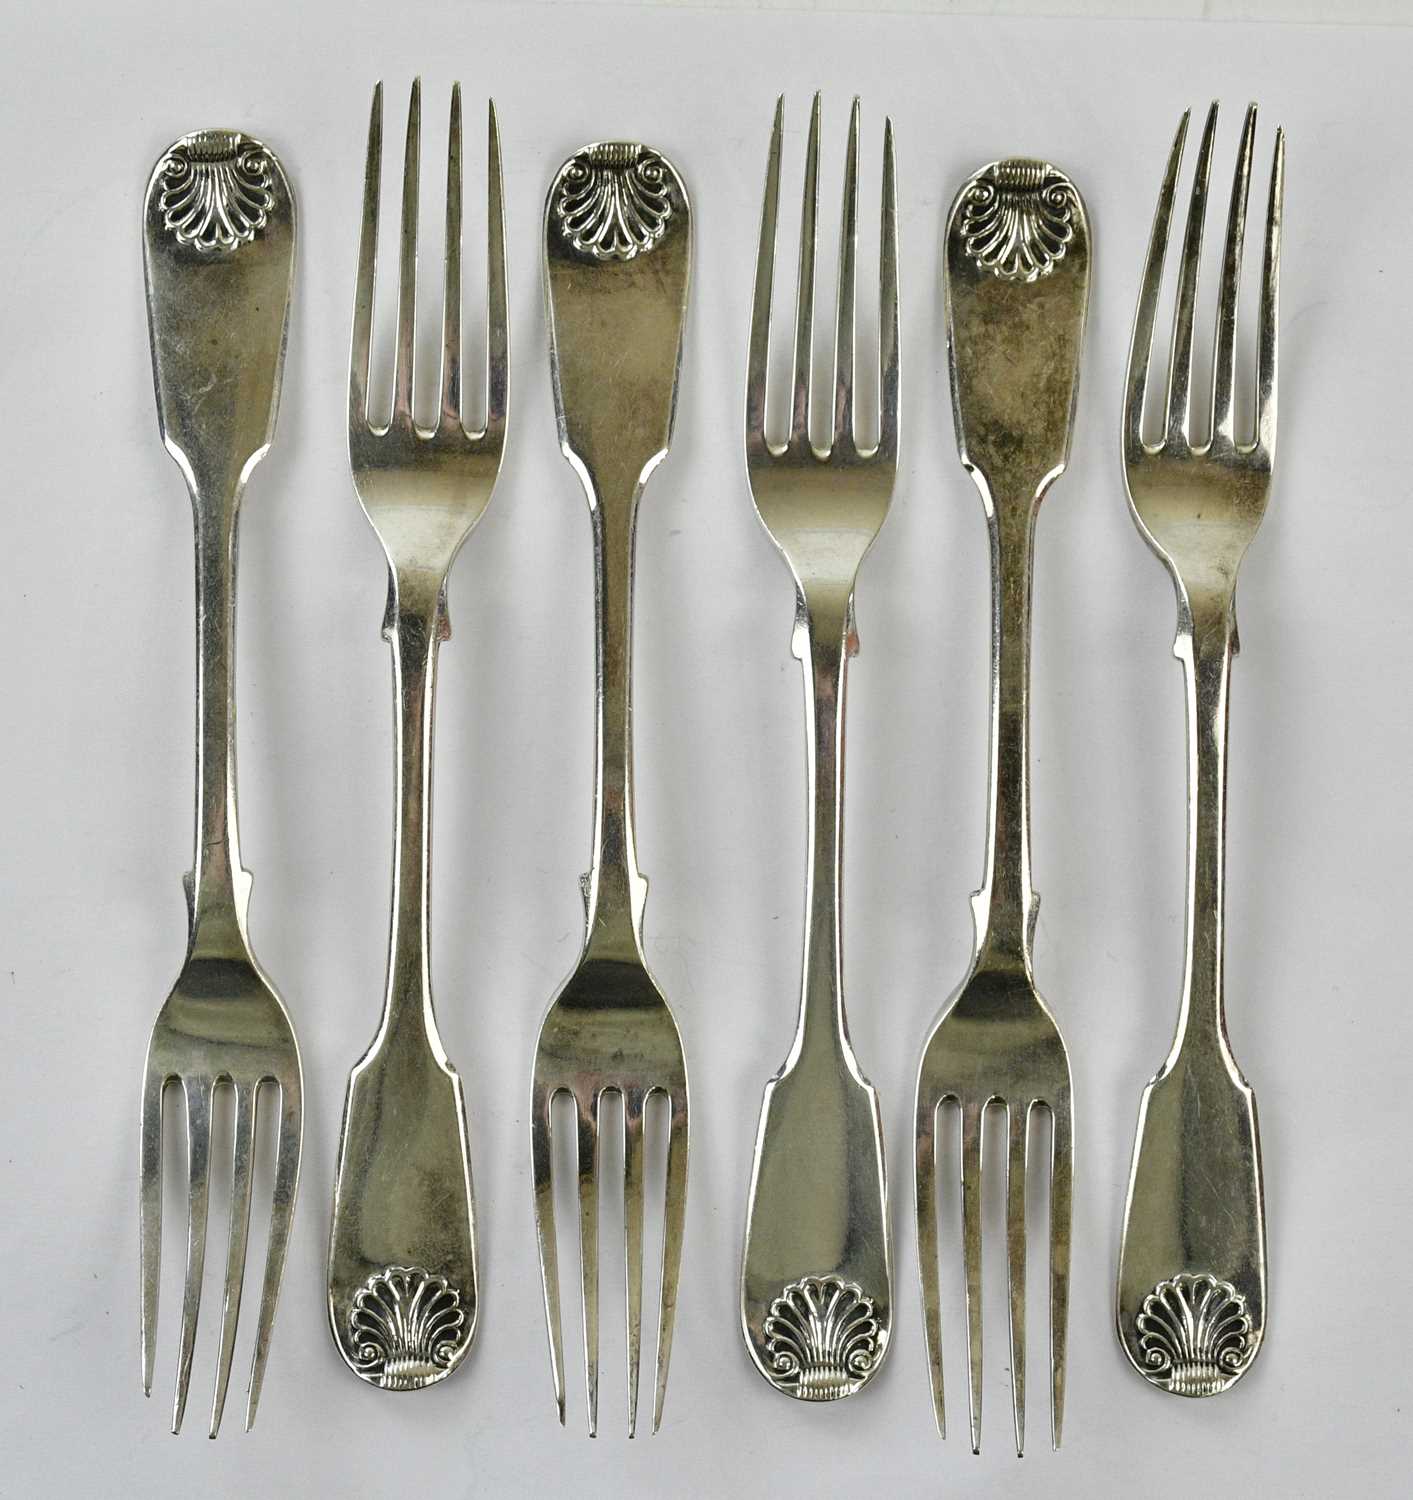 JOHN JAMES WHITING; a set of six Victorian hallmarked silver forks, London 1846, approx combined